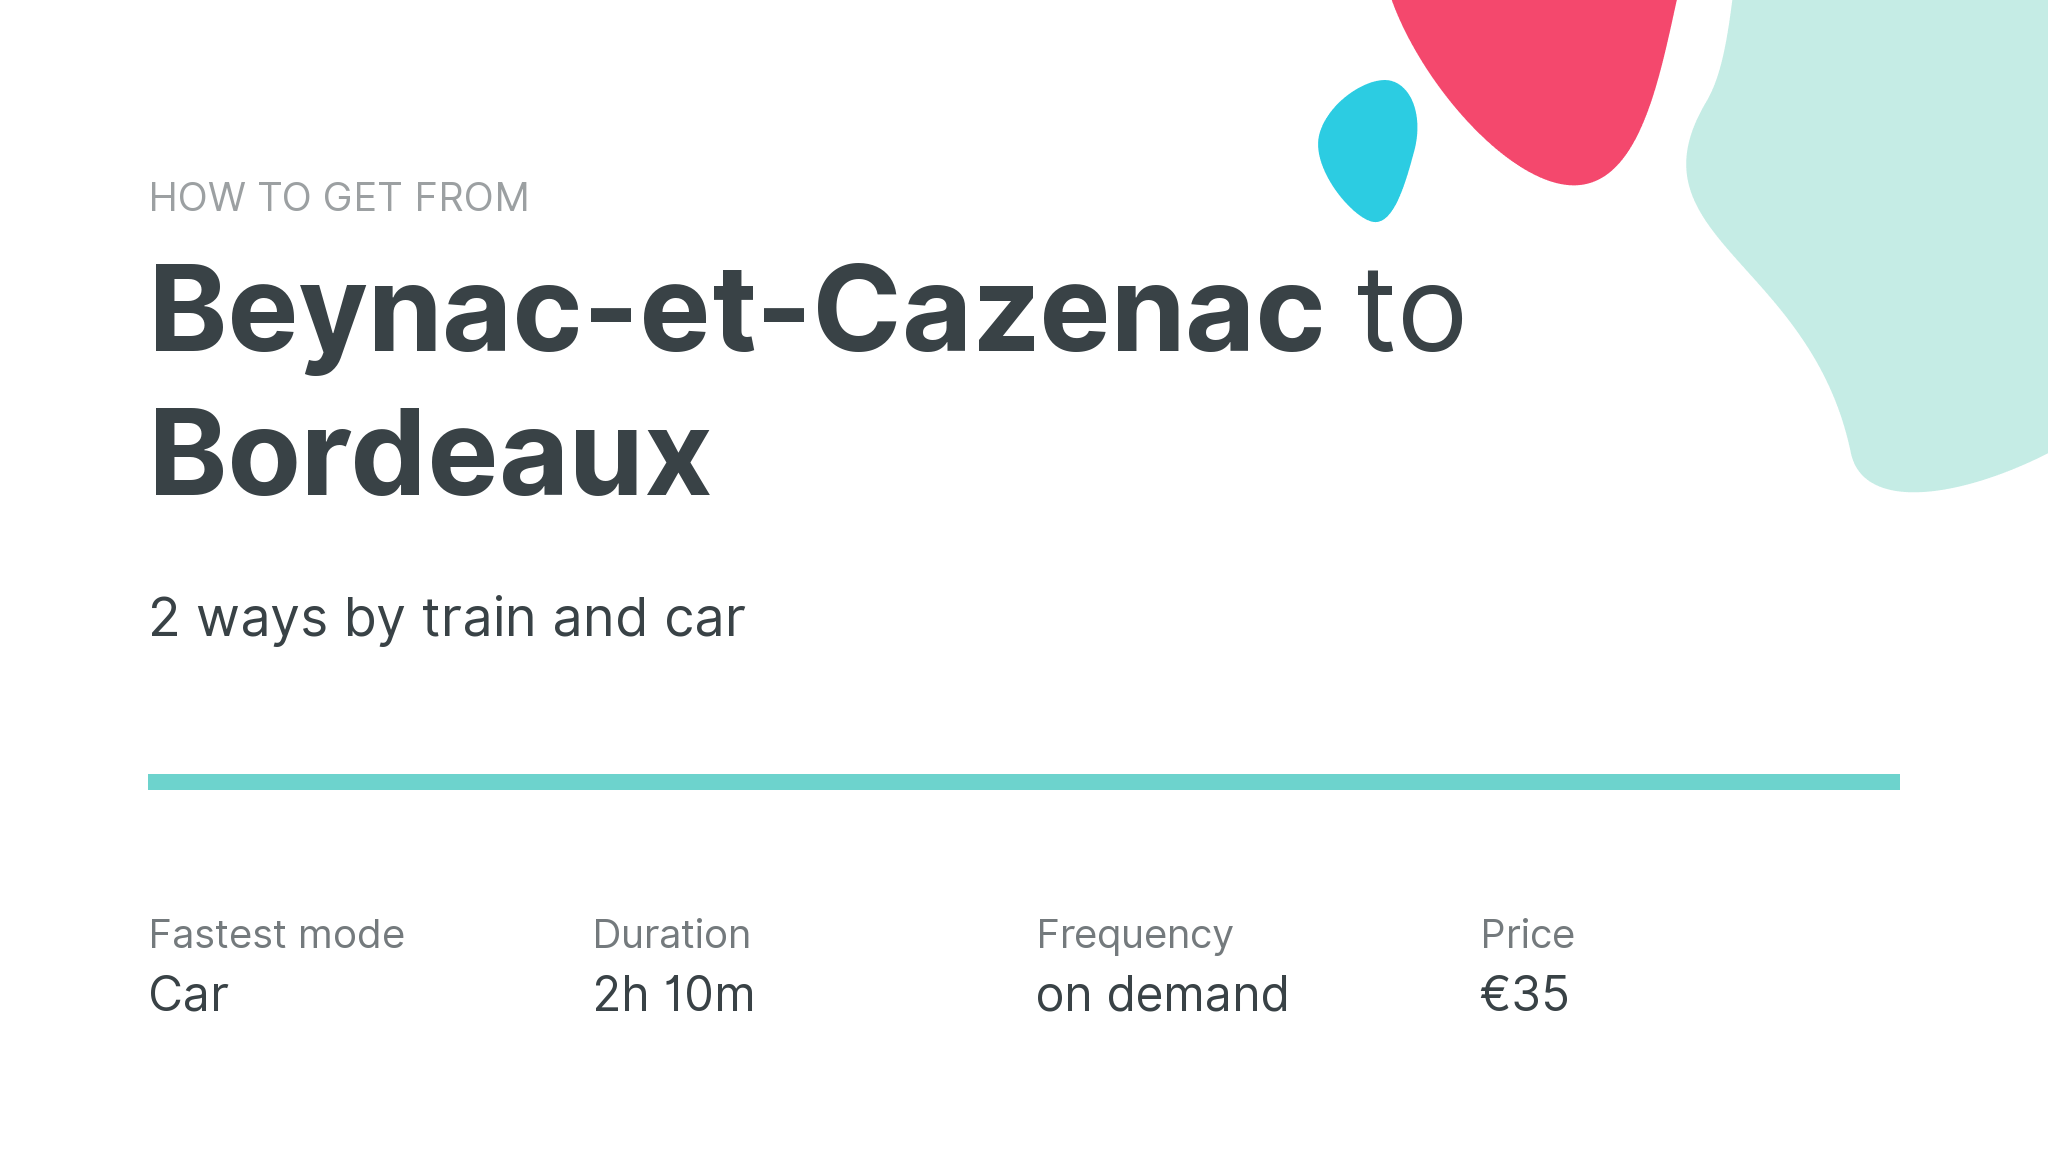 How do I get from Beynac-et-Cazenac to Bordeaux